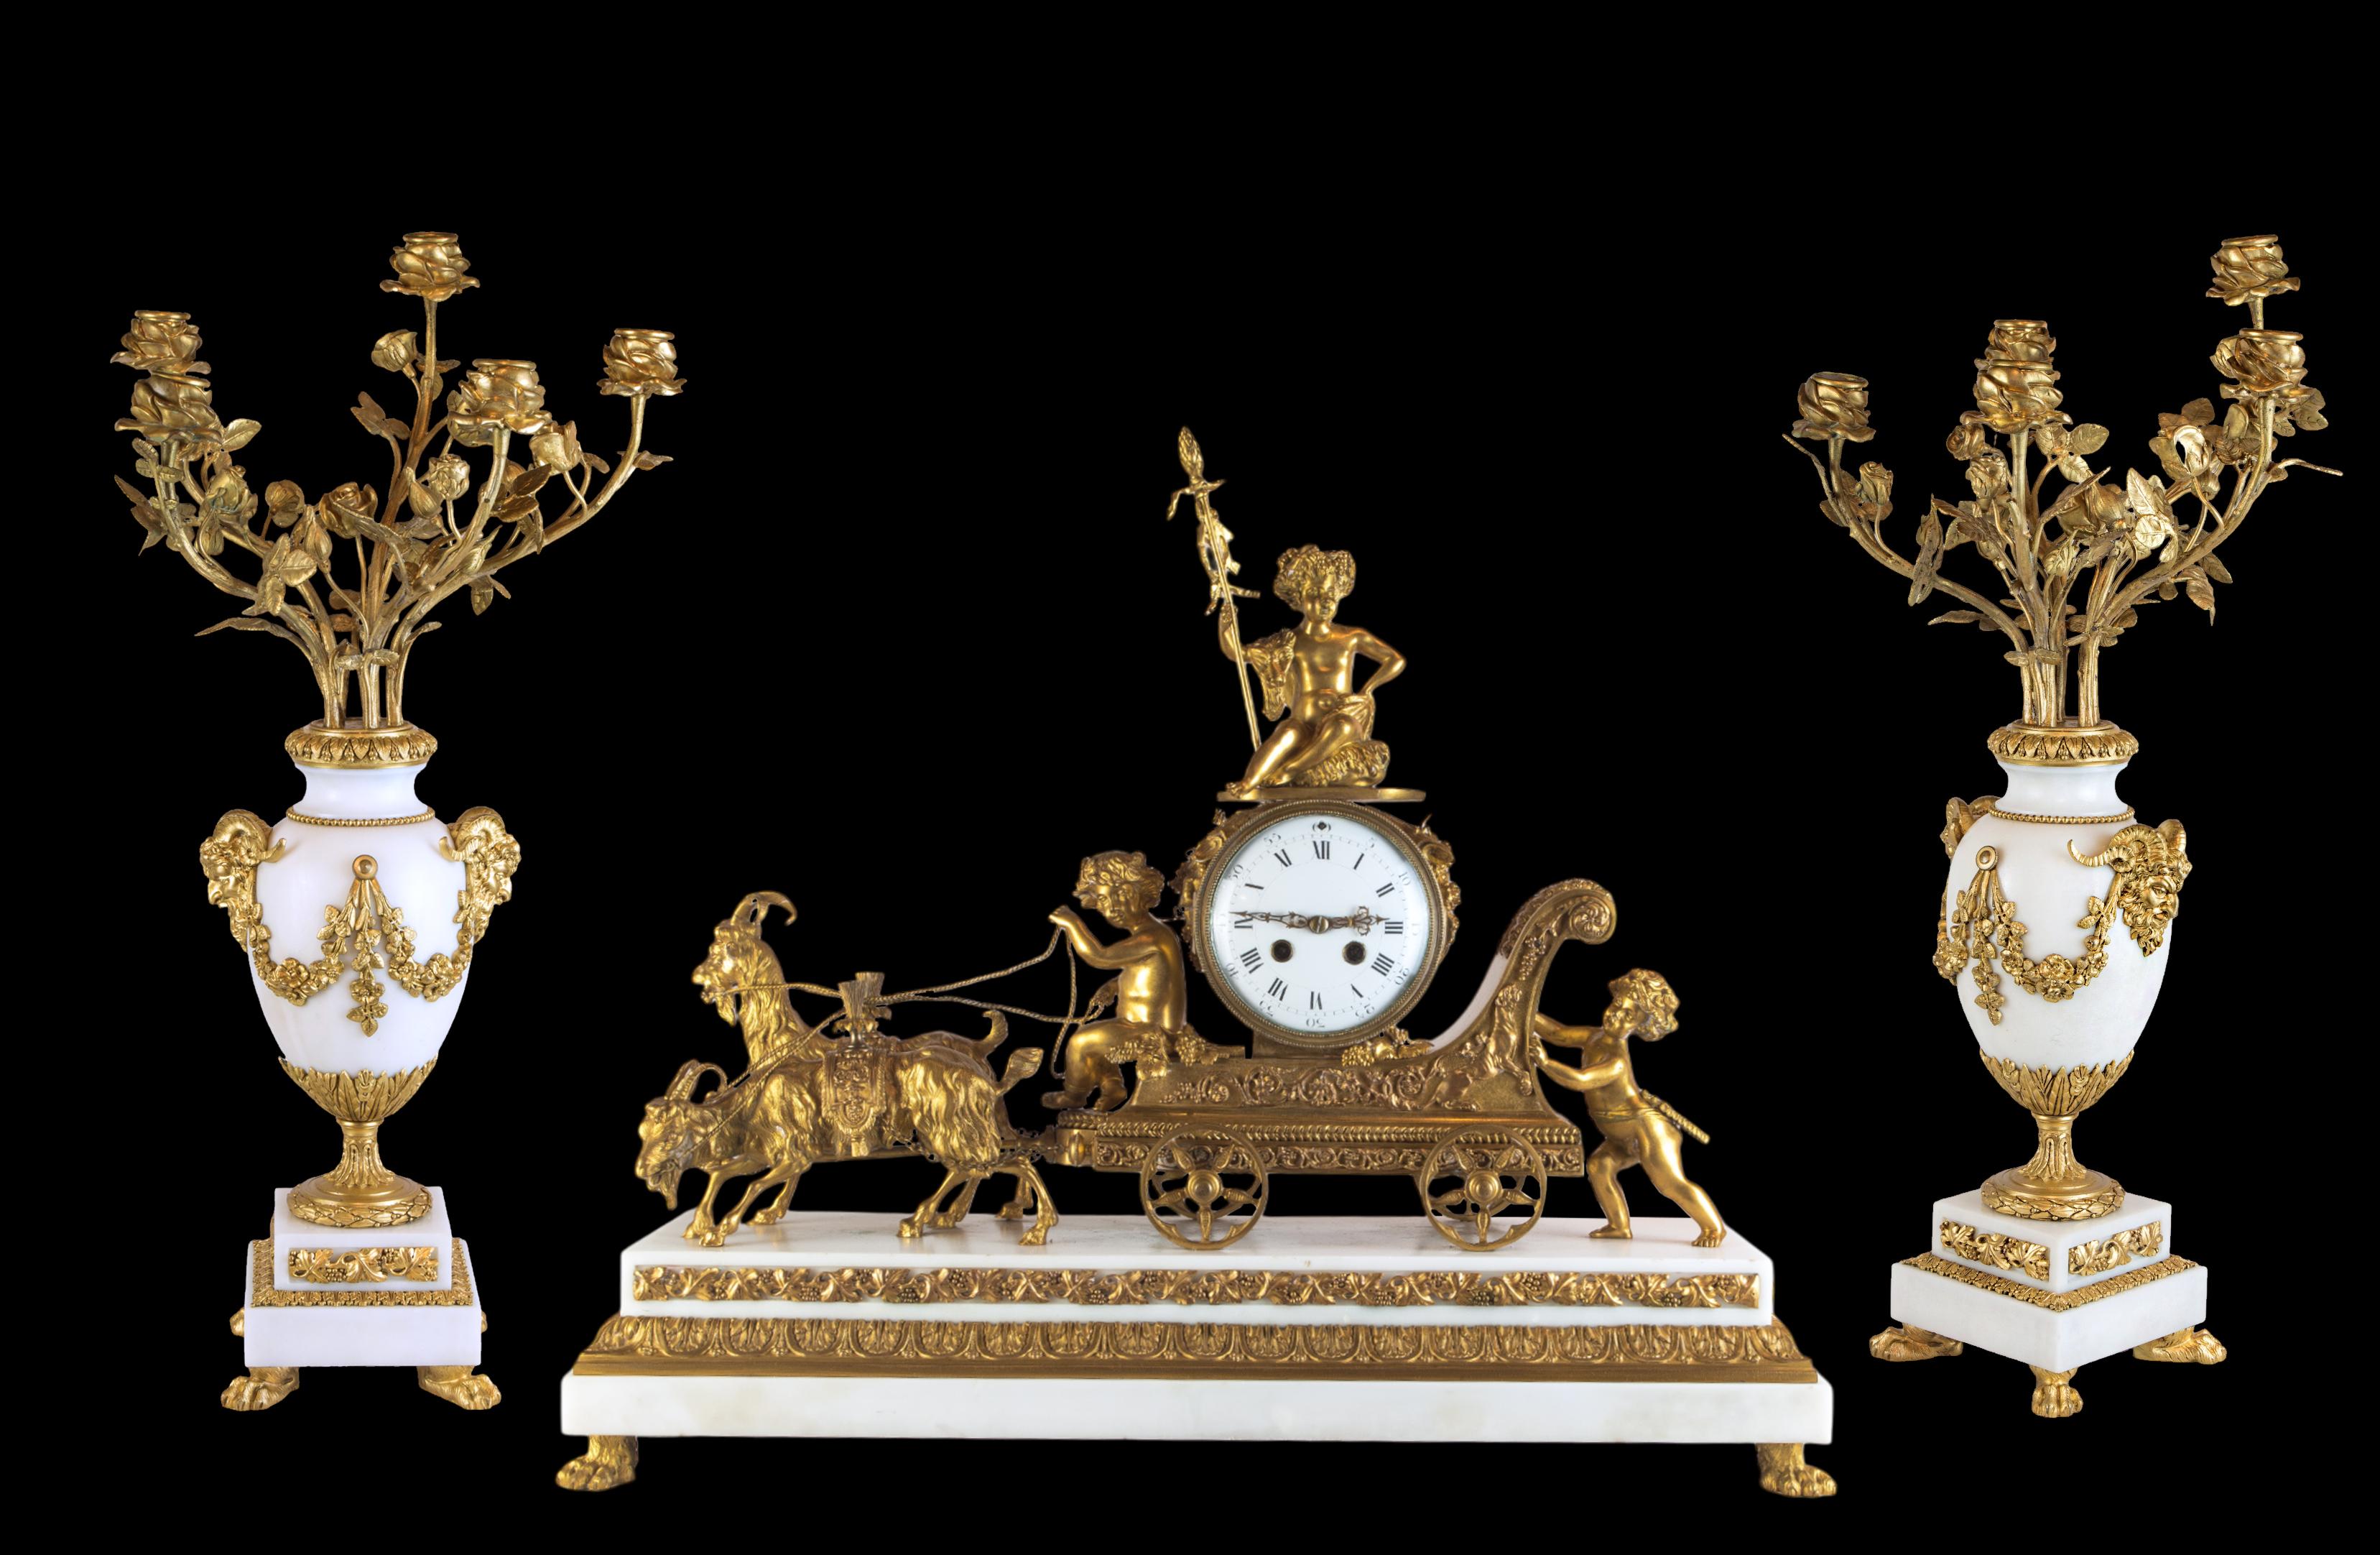 A fine antique French Gilt bronze and white marble garniture set of three putti playing in Thor's chariot. Rendered in crisp and bronze, a pair of Rams in dynamic poses pull the chariot, which we know belongs to Thor, as he is depicted and known for